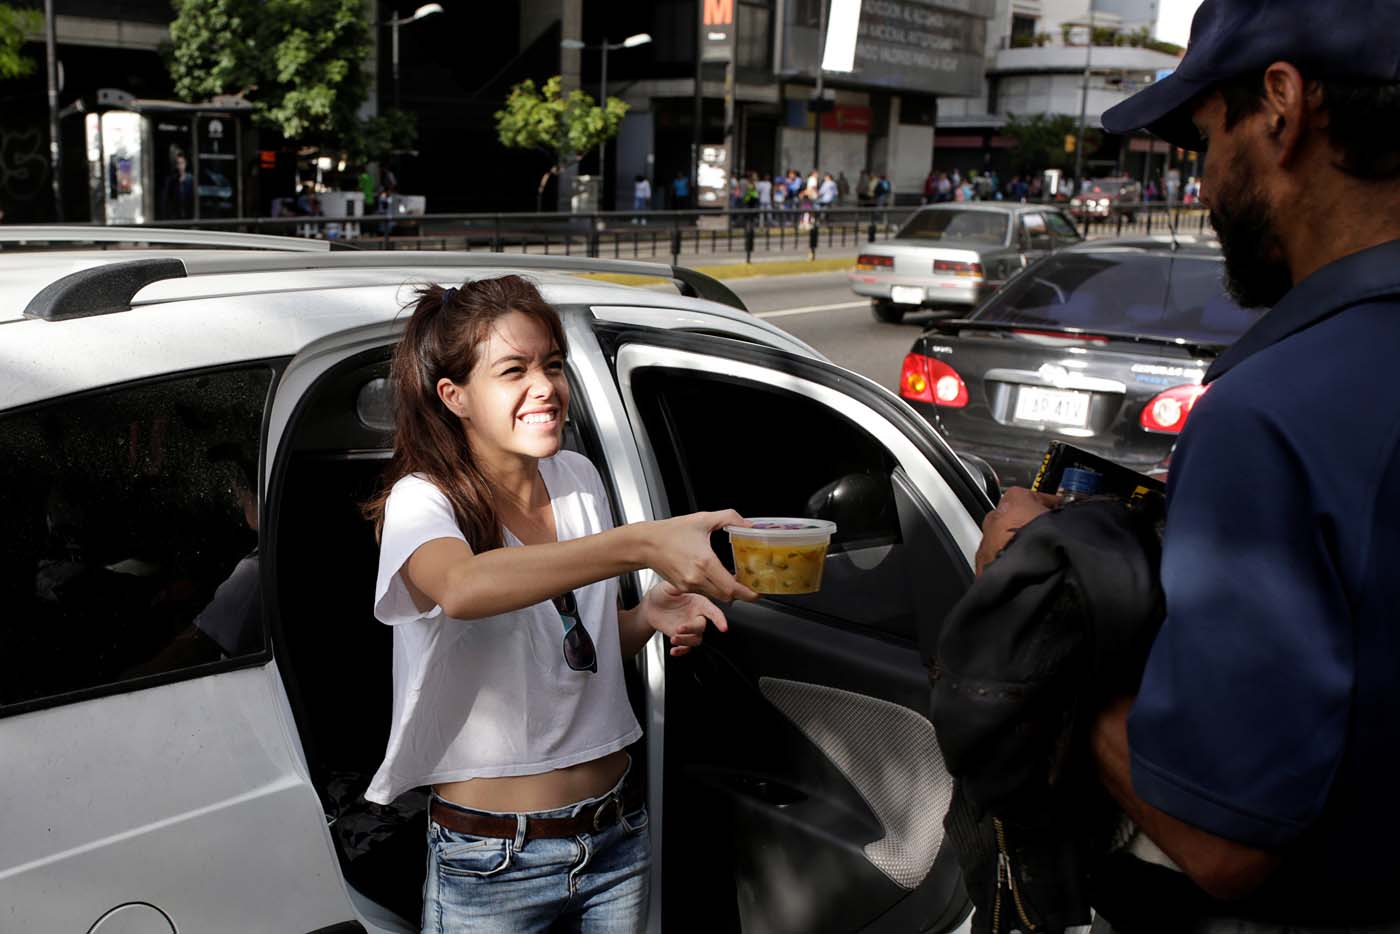 Mariana Zuniga (L), volunteer of Make The Difference (Haz La Diferencia) charity initiative, gives a cup of soup to a man in a street of Caracas, Venezuela March 5, 2017. Picture taken March 5, 2017. REUTERS/Marco Bello